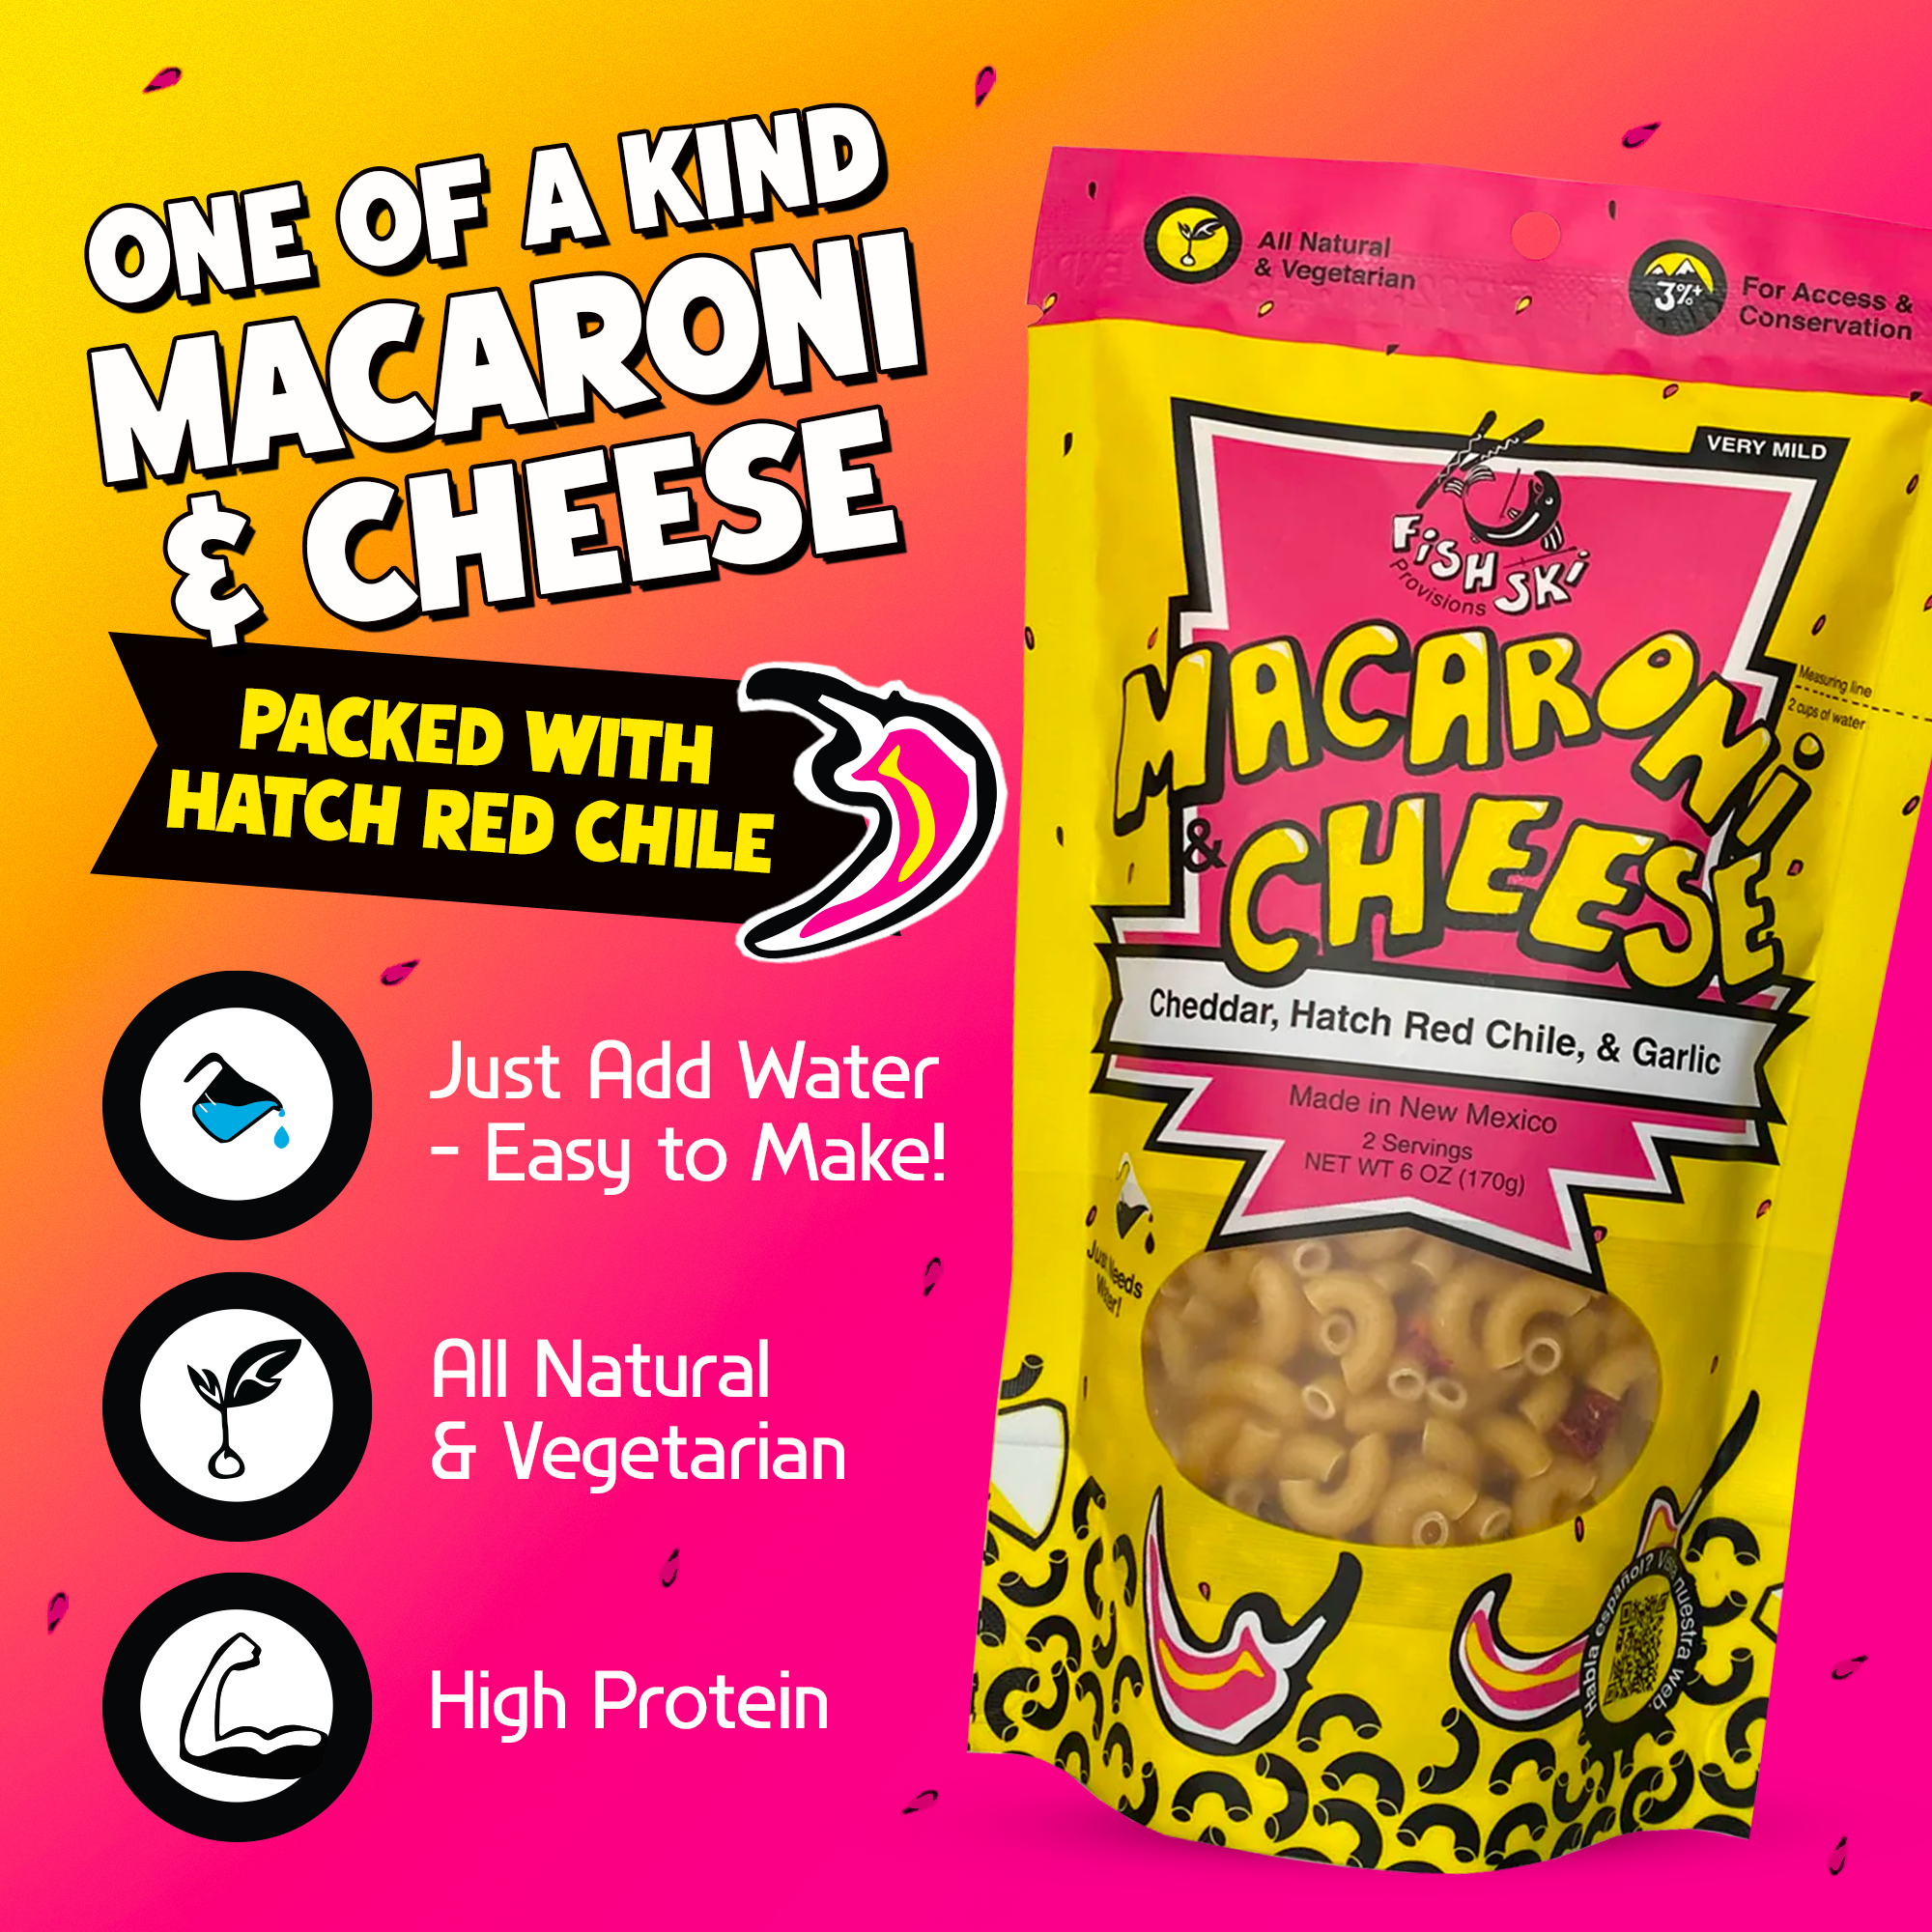 FishSki Provisions Hatch Red Chile Cheddar Macaroni and Cheese 32 pack - image 2 of 4